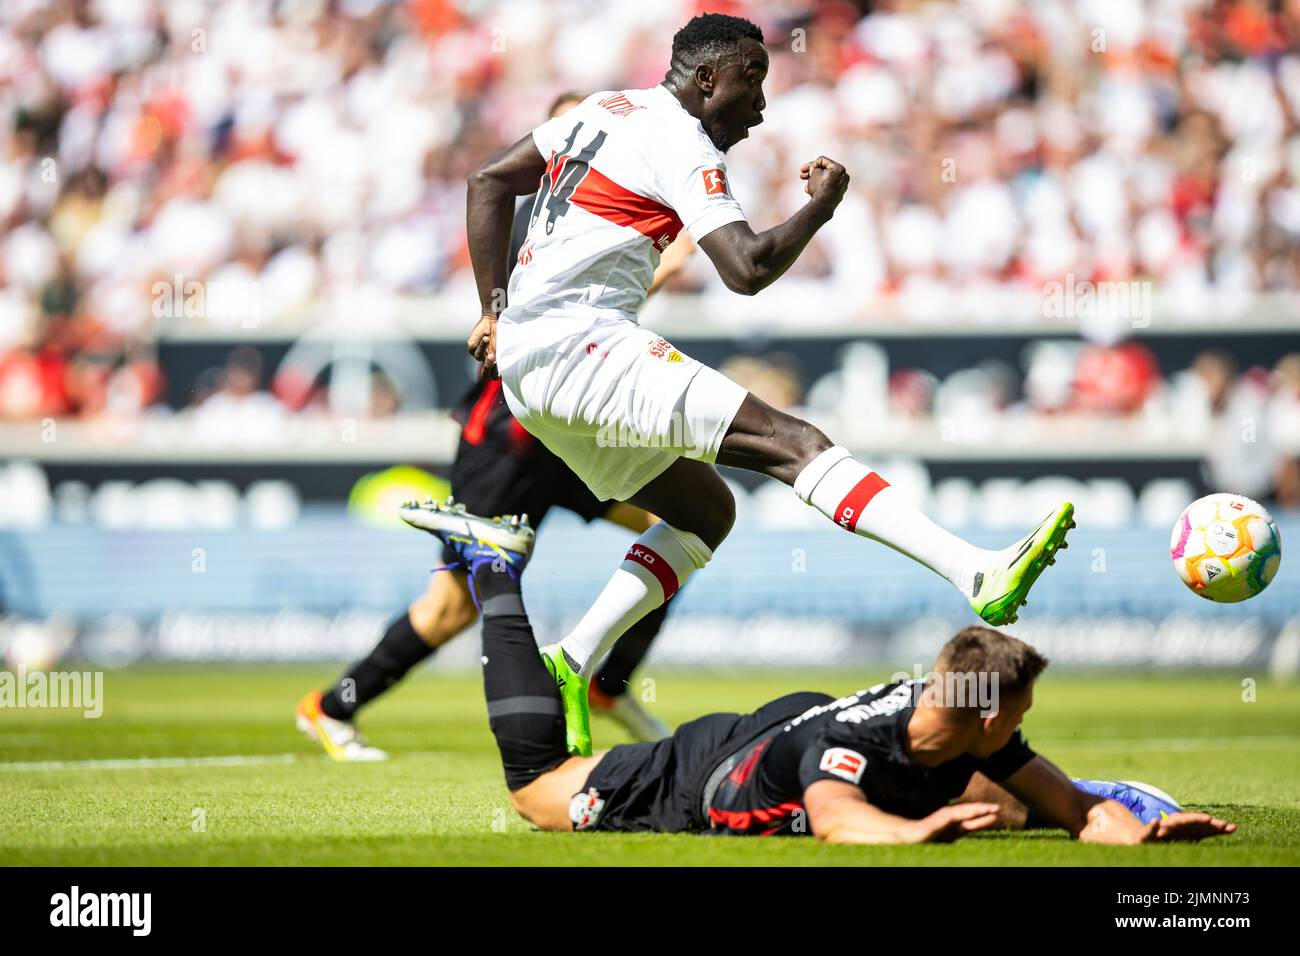 07 August 2022, Baden-Wuerttemberg, Stuttgart: Soccer: Bundesliga, VfB Stuttgart - RB Leipzig, Matchday 1, Mercedes-Benz Arena. Stuttgart's Silas Katompa Mvumpa in action. Photo: Tom Weller/dpa - IMPORTANT NOTE: In accordance with the requirements of the DFL Deutsche Fußball Liga and the DFB Deutscher Fußball-Bund, it is prohibited to use or have used photographs taken in the stadium and/or of the match in the form of sequence pictures and/or video-like photo series. Stock Photo